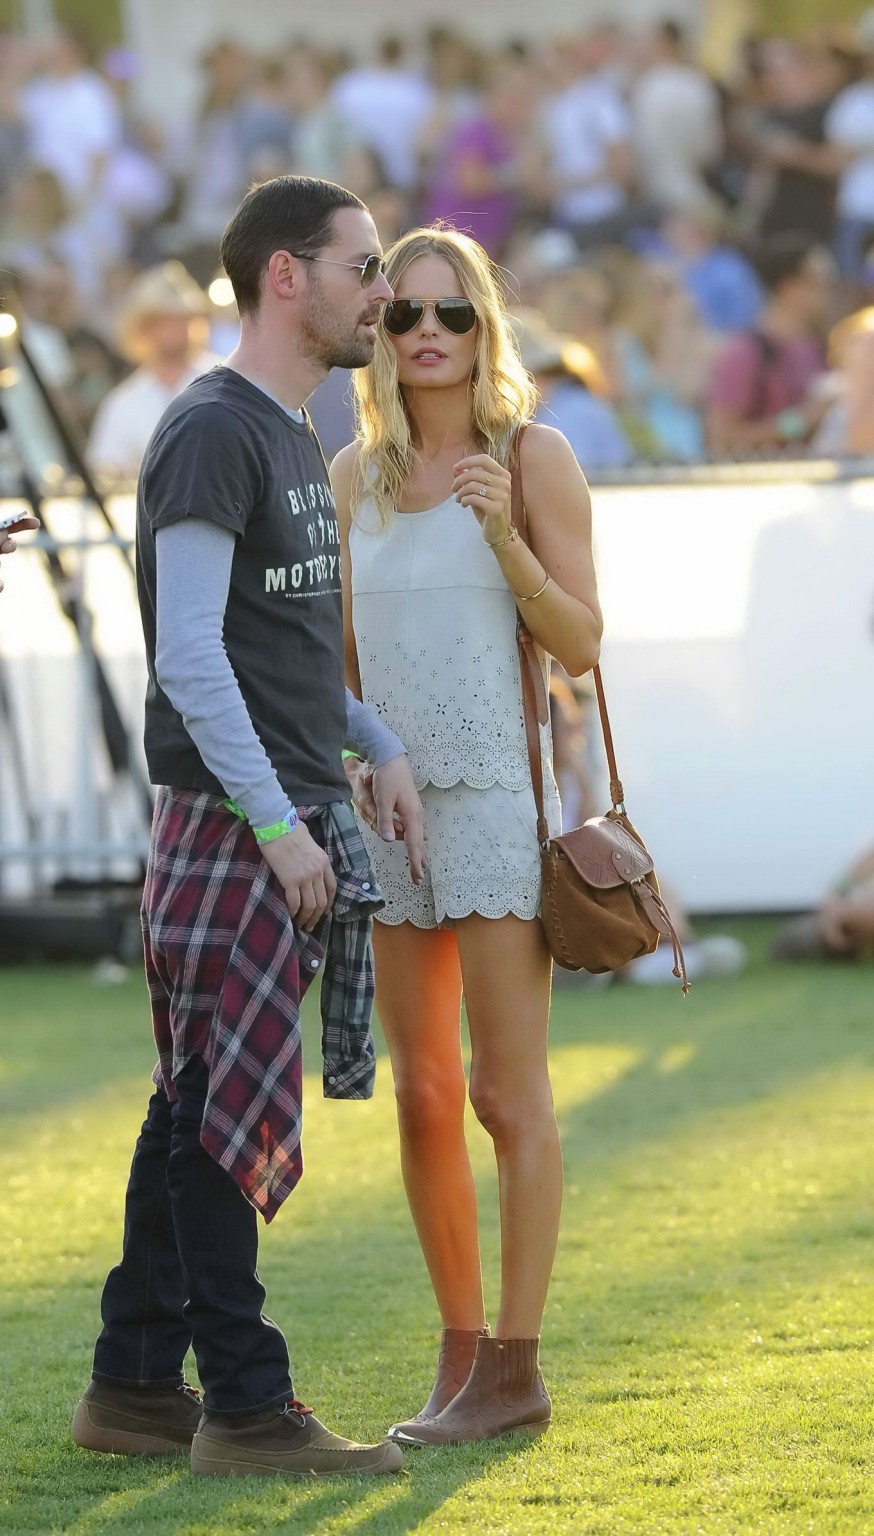 Kate Bosworth leggy wearing retro shorts and top at Coachella Music and Arts Fes #75235326